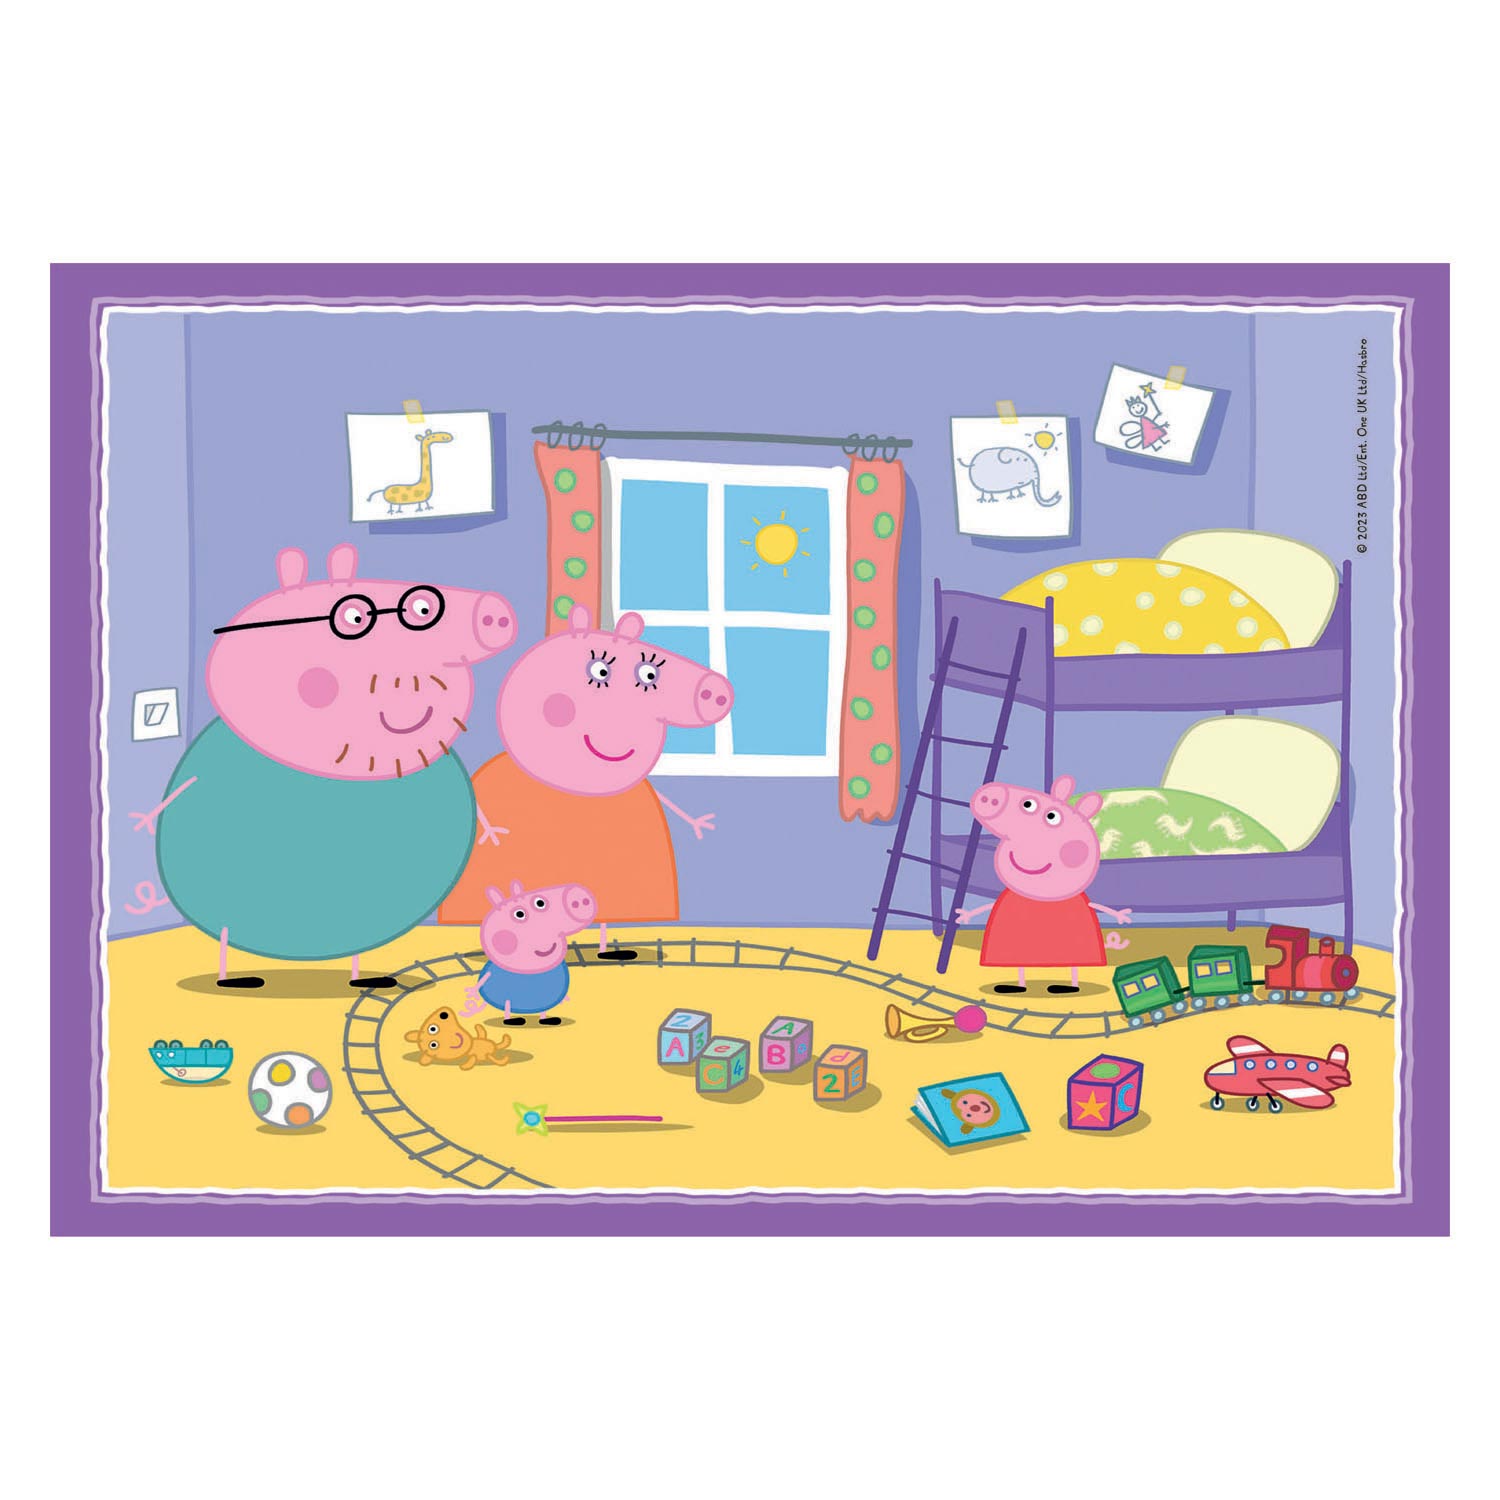 Clementoni 4in1 Puzzle Peppa Pig